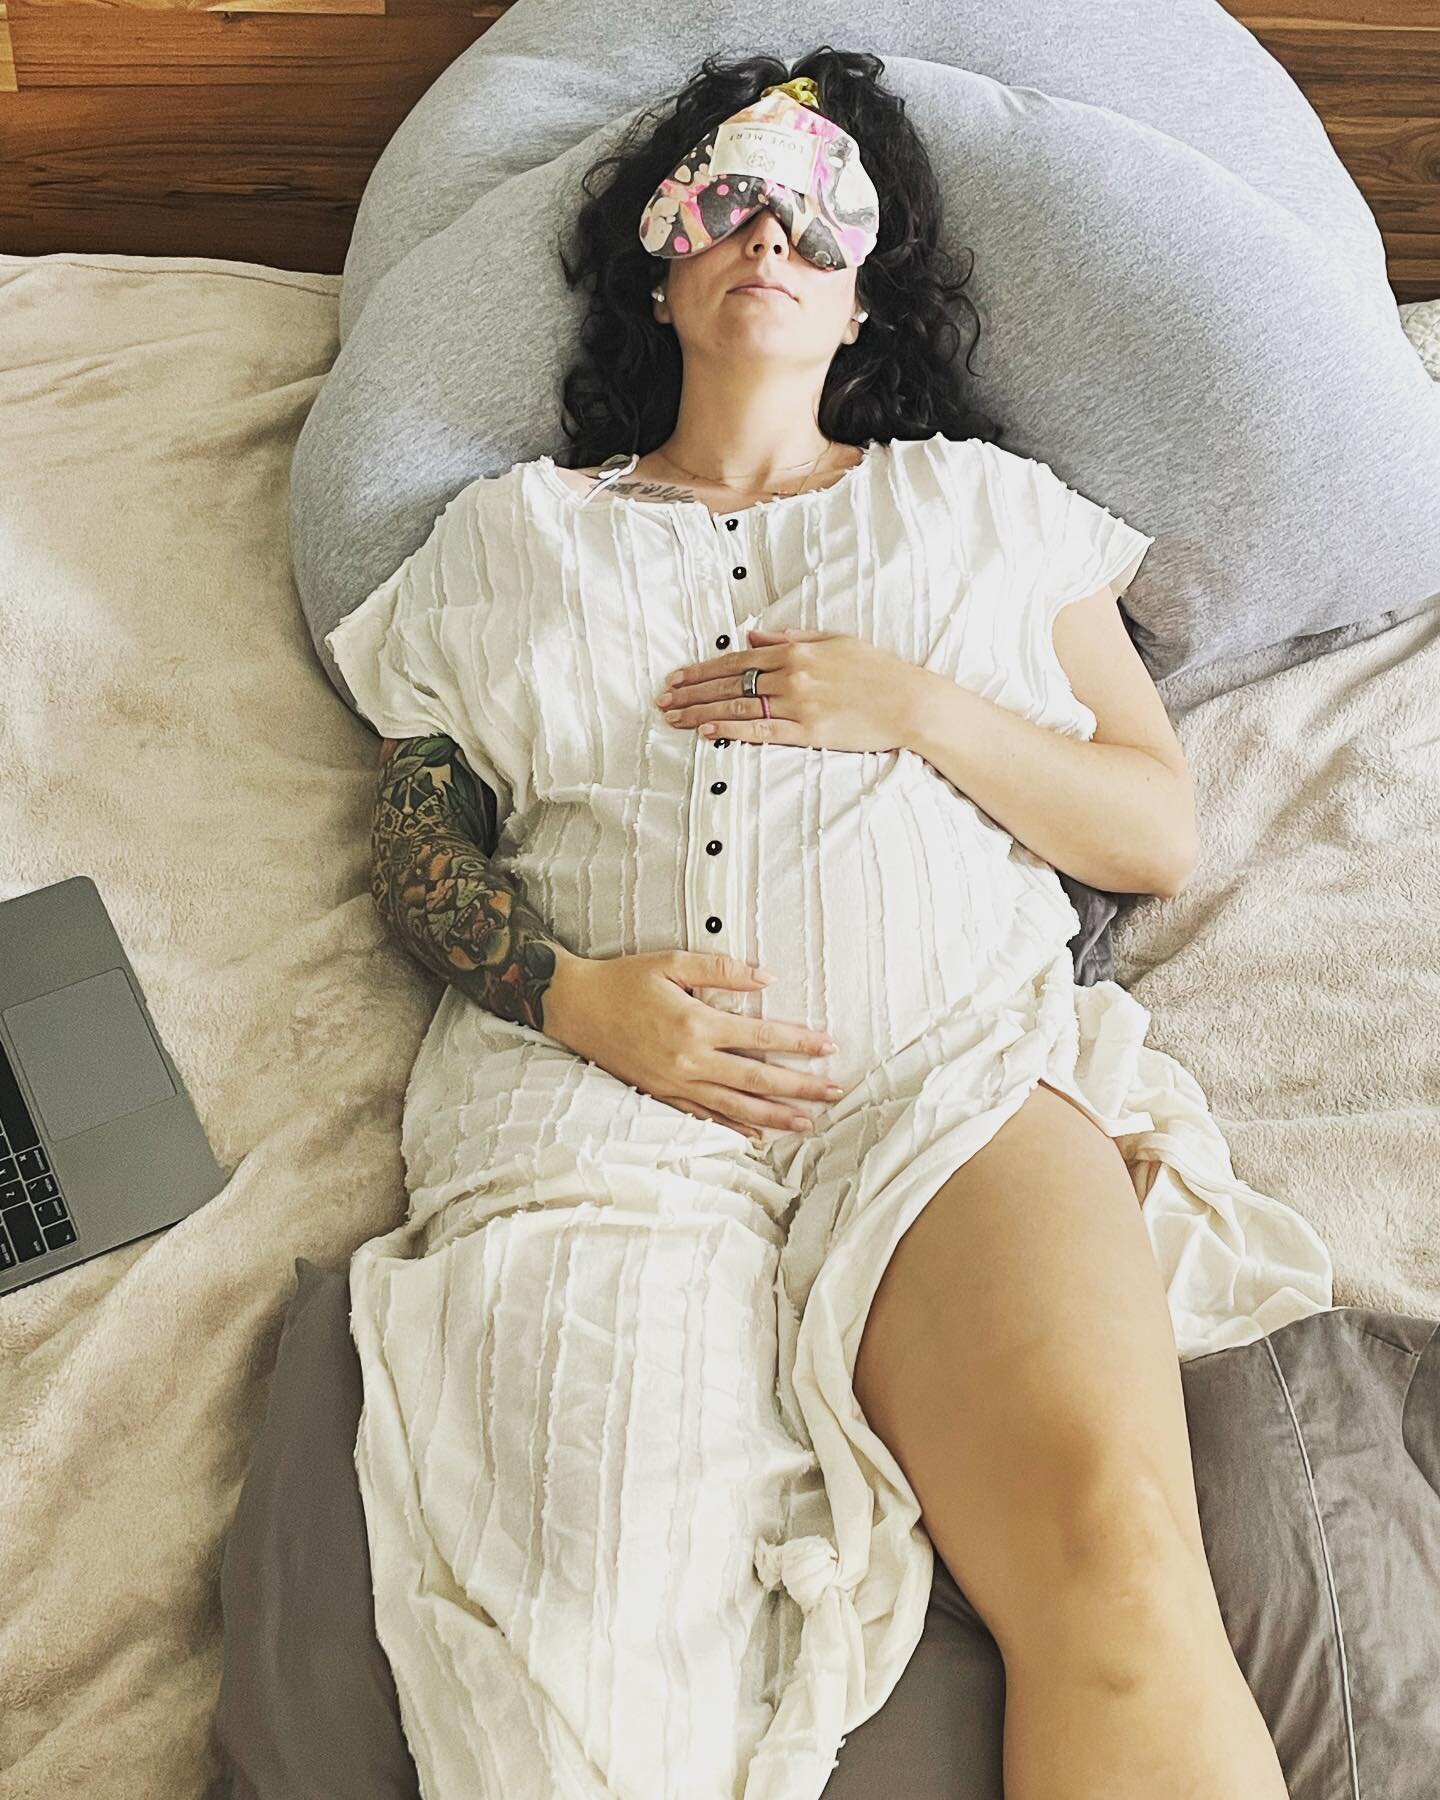 Do not disturb mama during her meditation.

Did you make time to meditate today? 

Ps. This lavender eye mask is luxurious after coming out of the freezer. 14/10 recommend

#meditation #selfcare #soulcare #meditationteacher #yoganidra #mindfulness #r